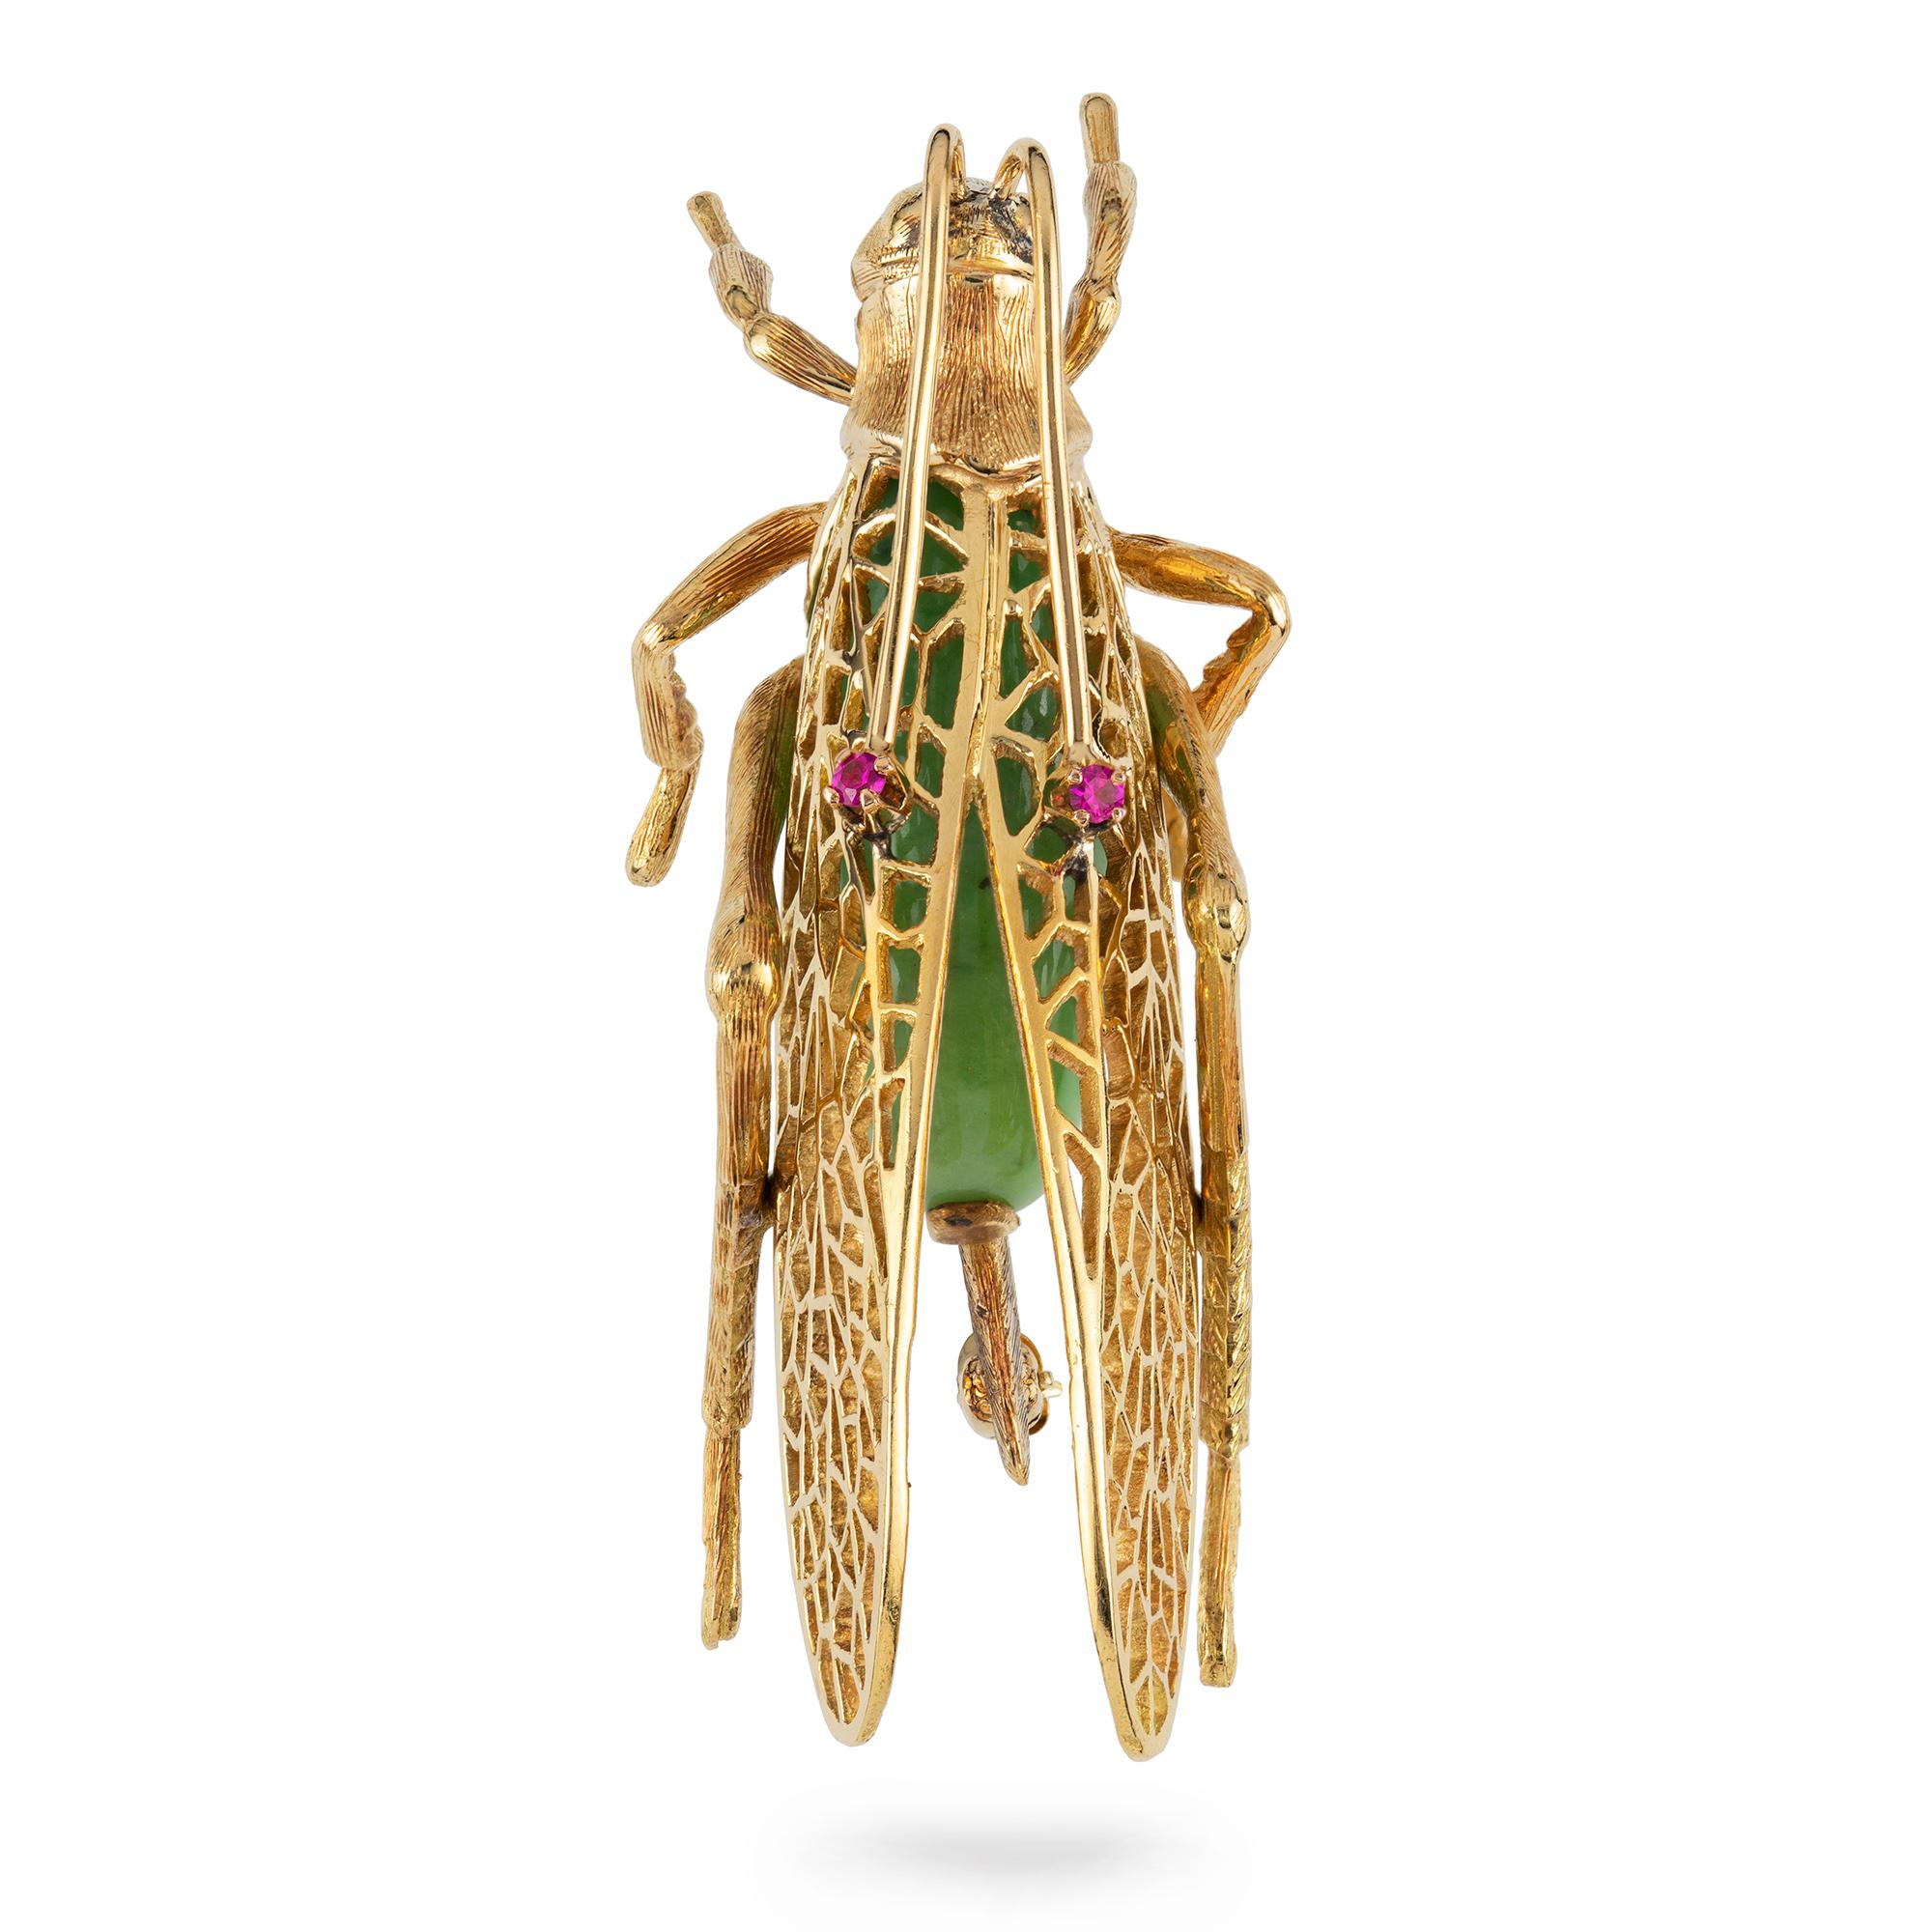 A gold and green grossular garnet grasshopper brooch, the body set with a green cabochon garnet, accompanied by GCS Report 79209-53 stating to be grossular-hibschite garnet weighing approximately 16.5 carats, the eyes set with faceted rubies, all to